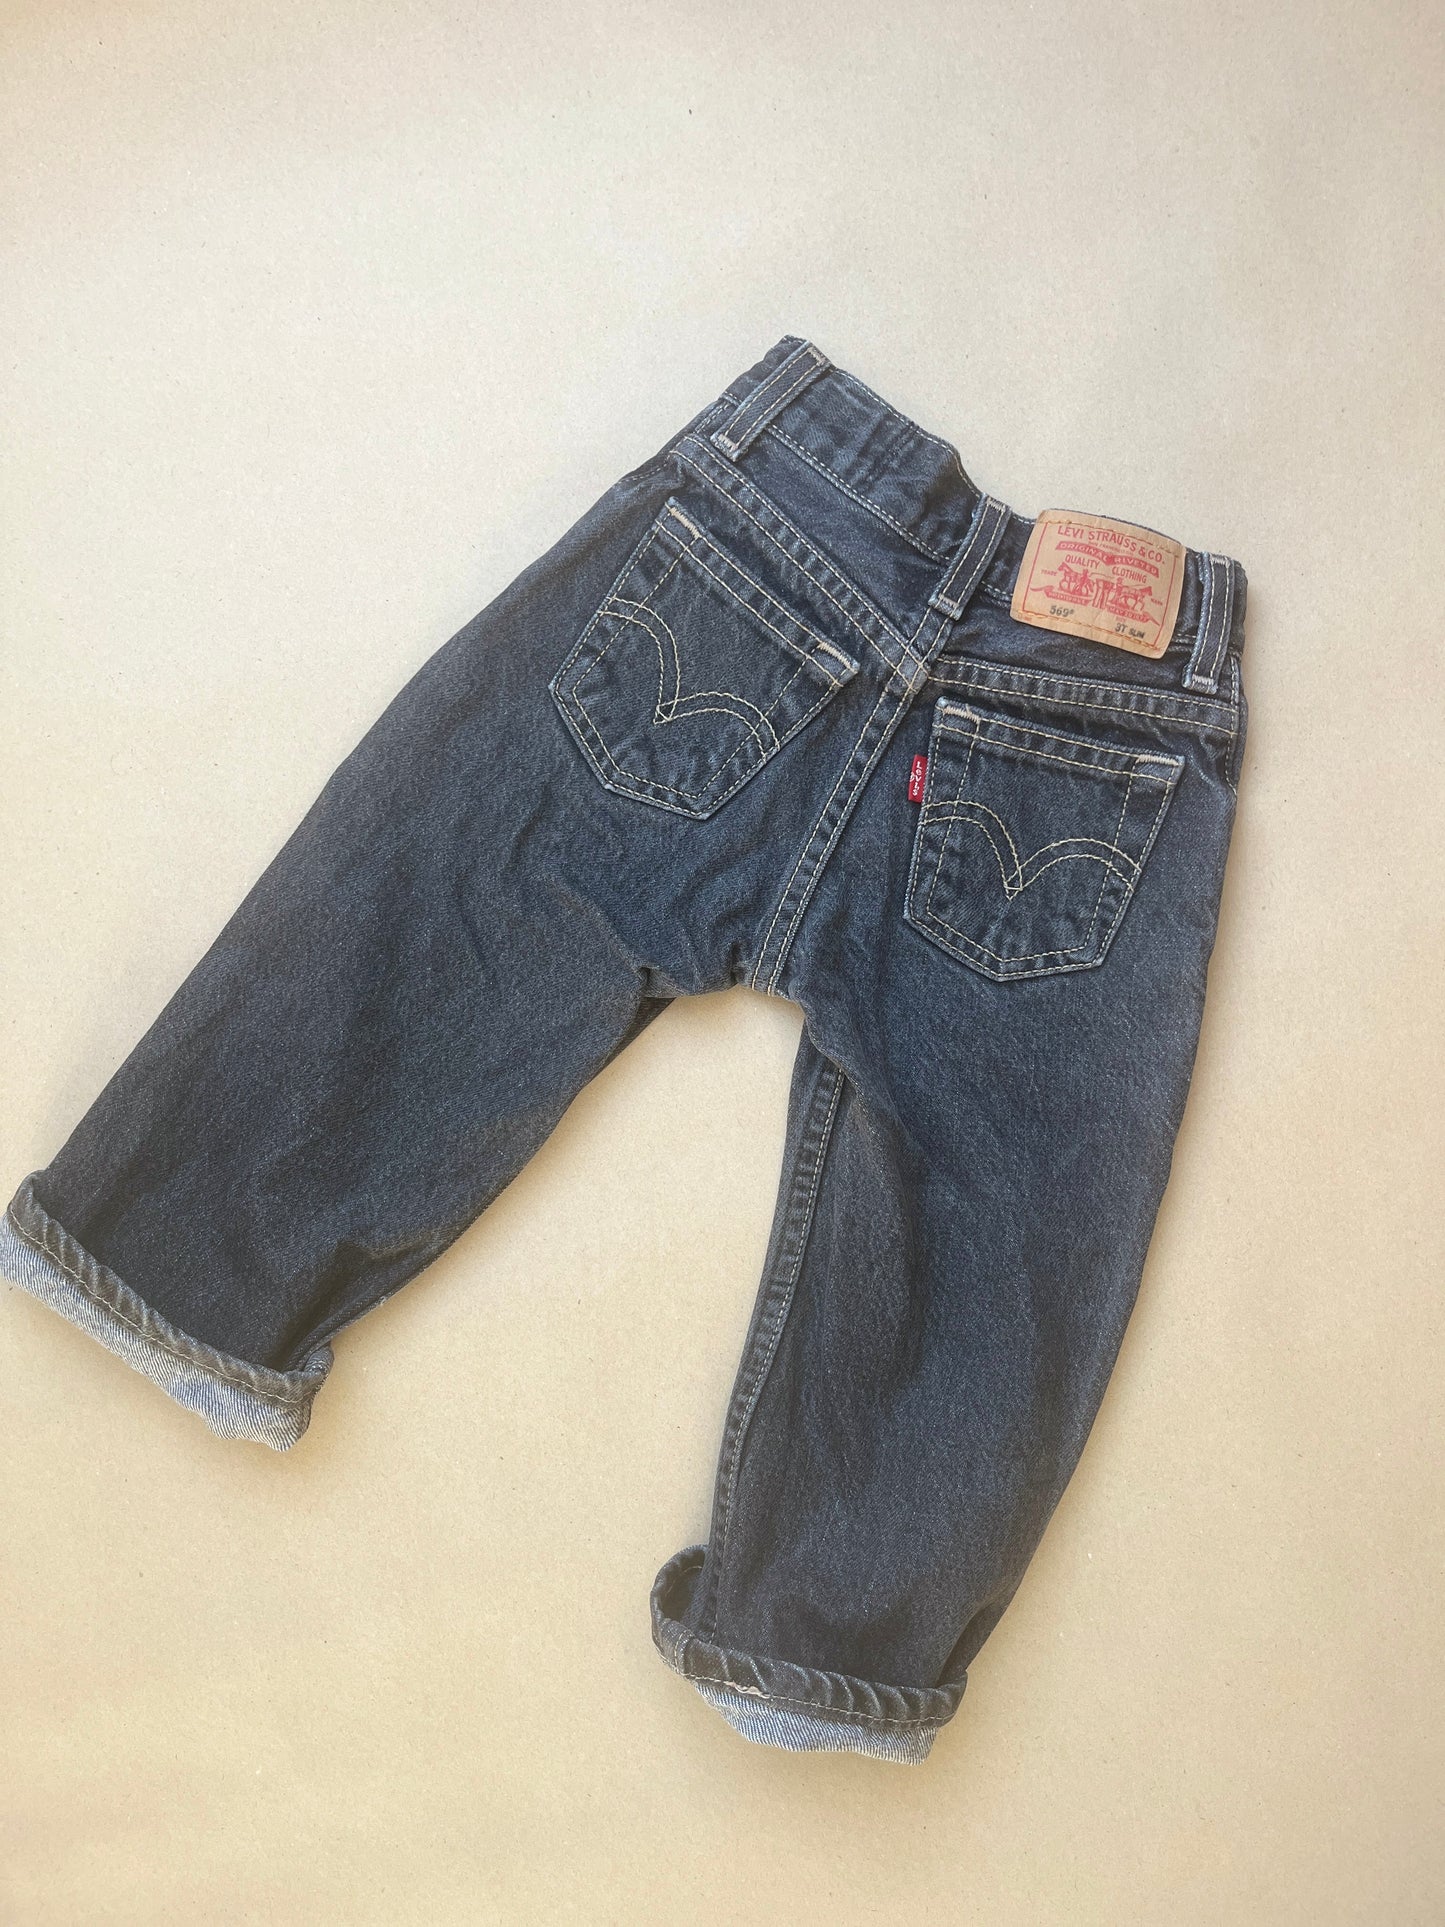 Jeans, 92/98